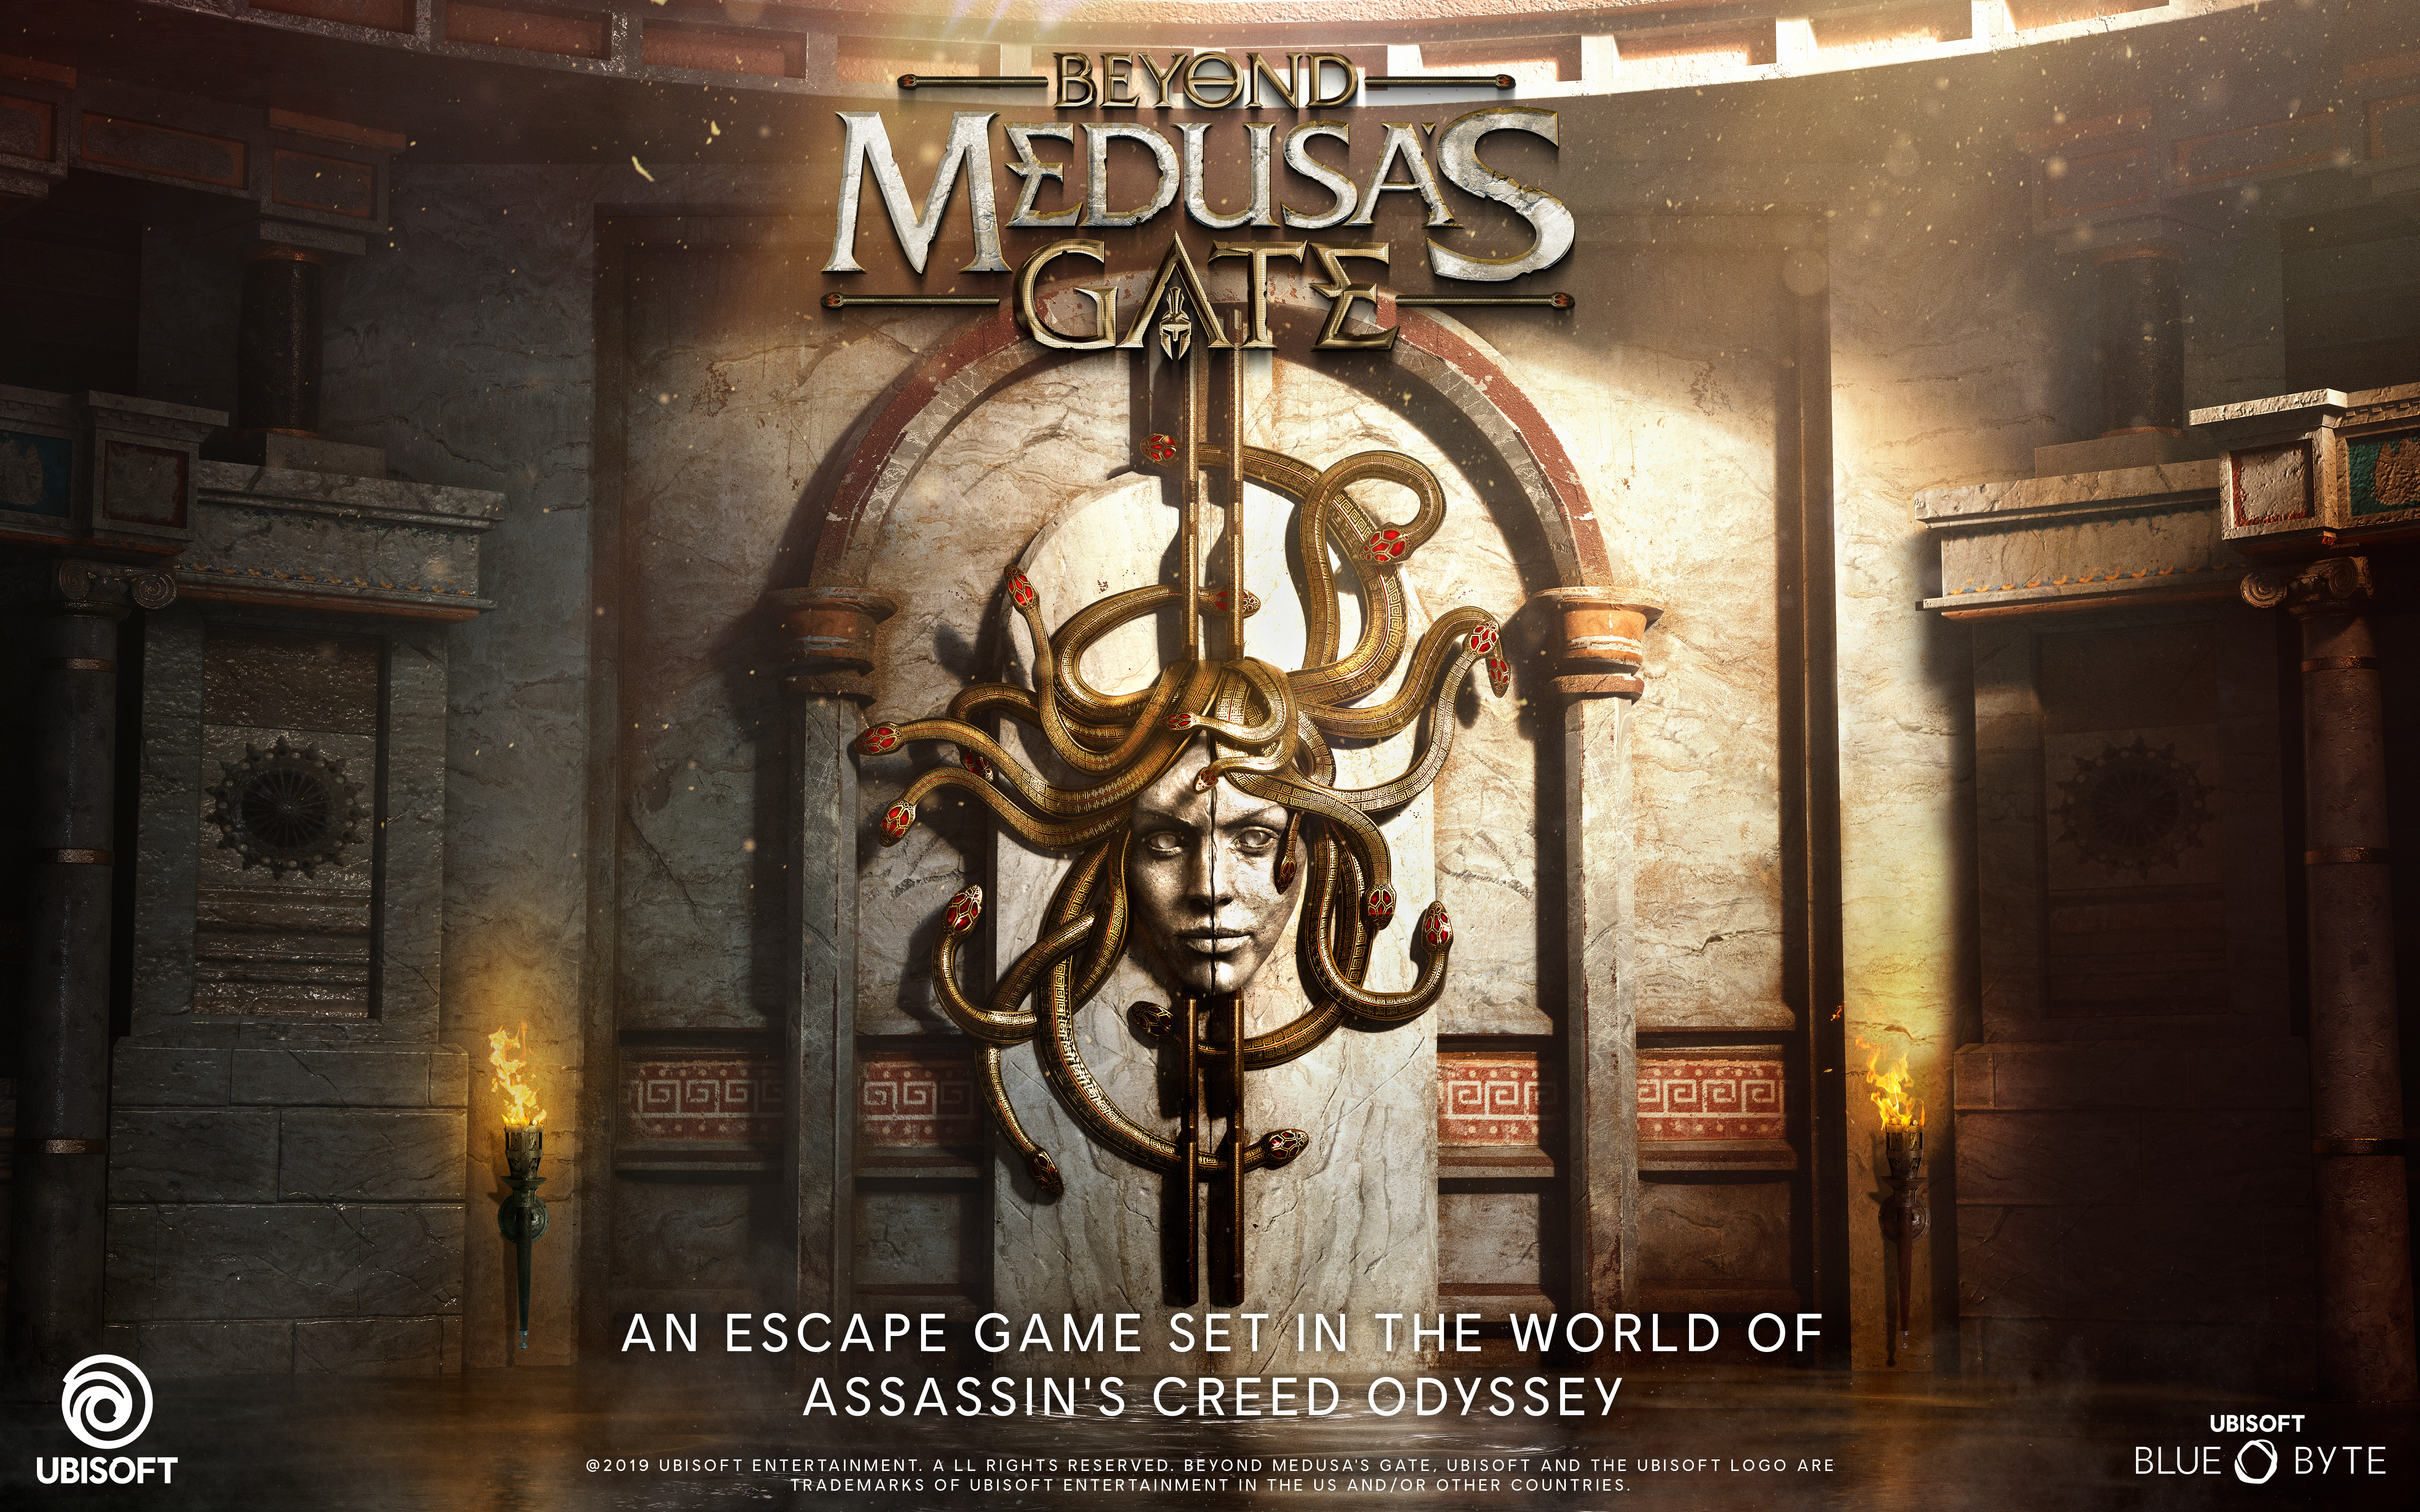 Beyond Medusa’s Gate is set in the re-creation of Ancient Greece from Assassin’s Creed® Odyssey.